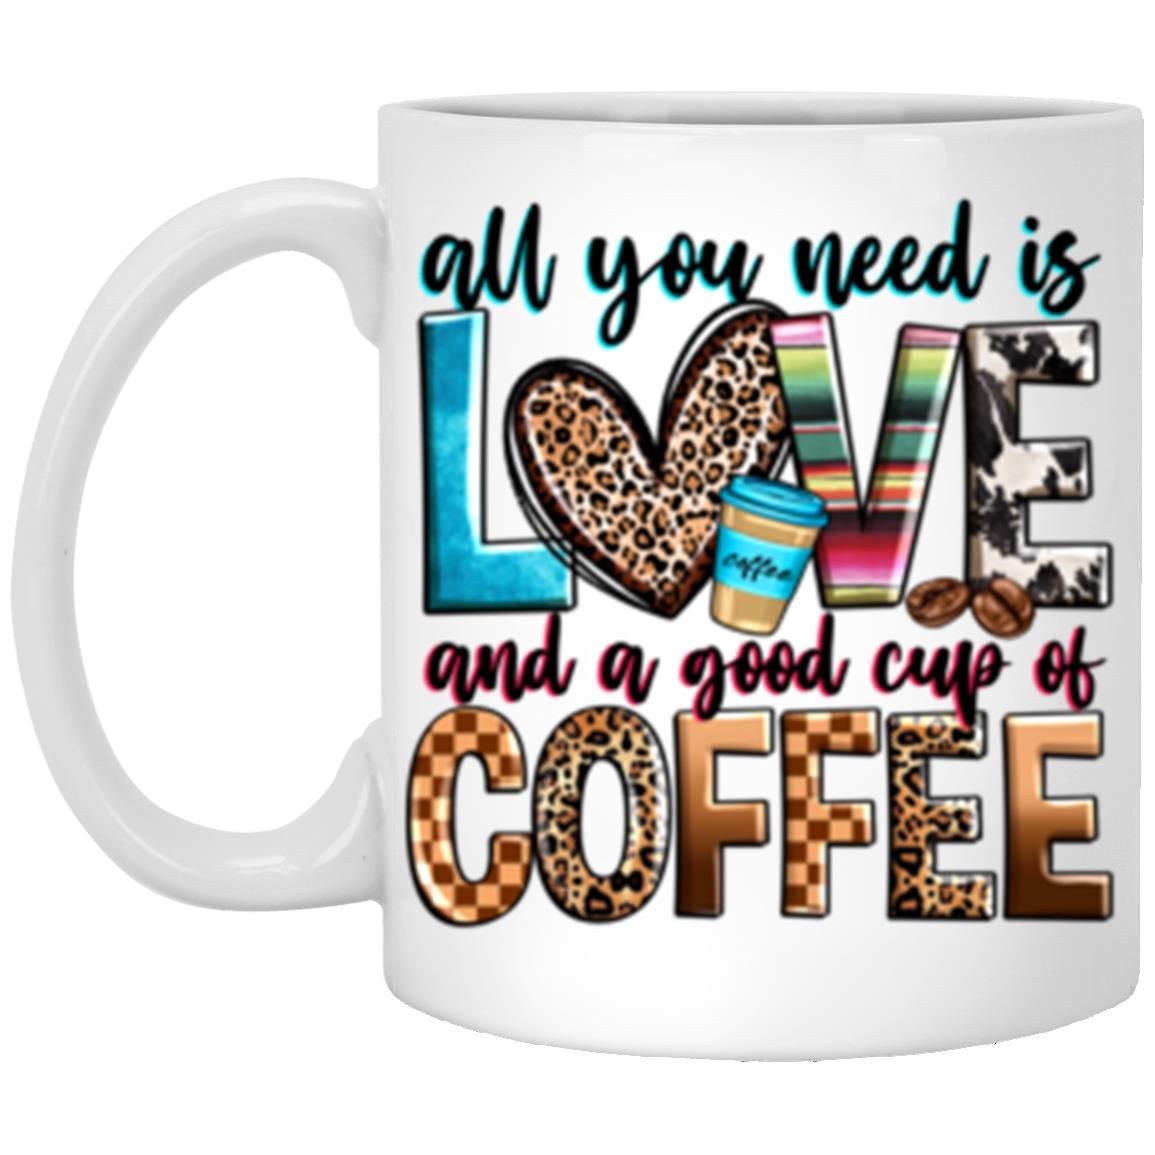 All you need is love and a good cup of coffee 11oz White Coffee Mug gift Coffee lover gift-White-Family-Gift-Planet